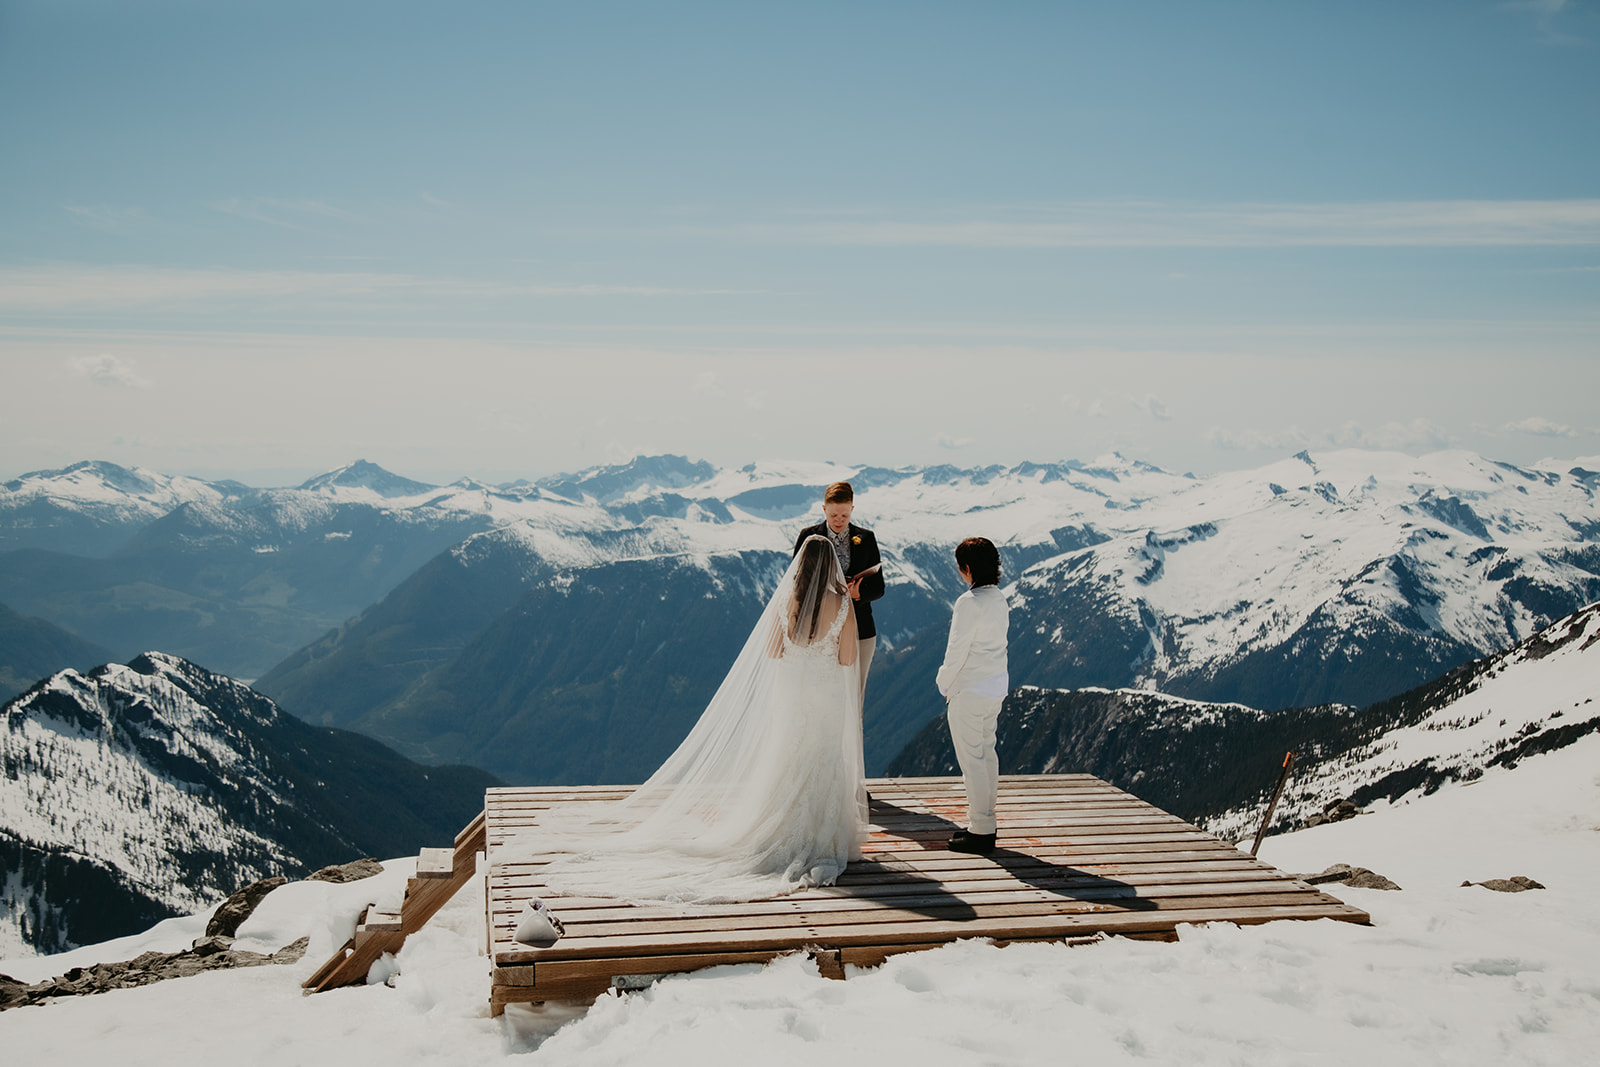 Squamish elopement with Blackcomb Helicopter in the Tantalus Mountain Range